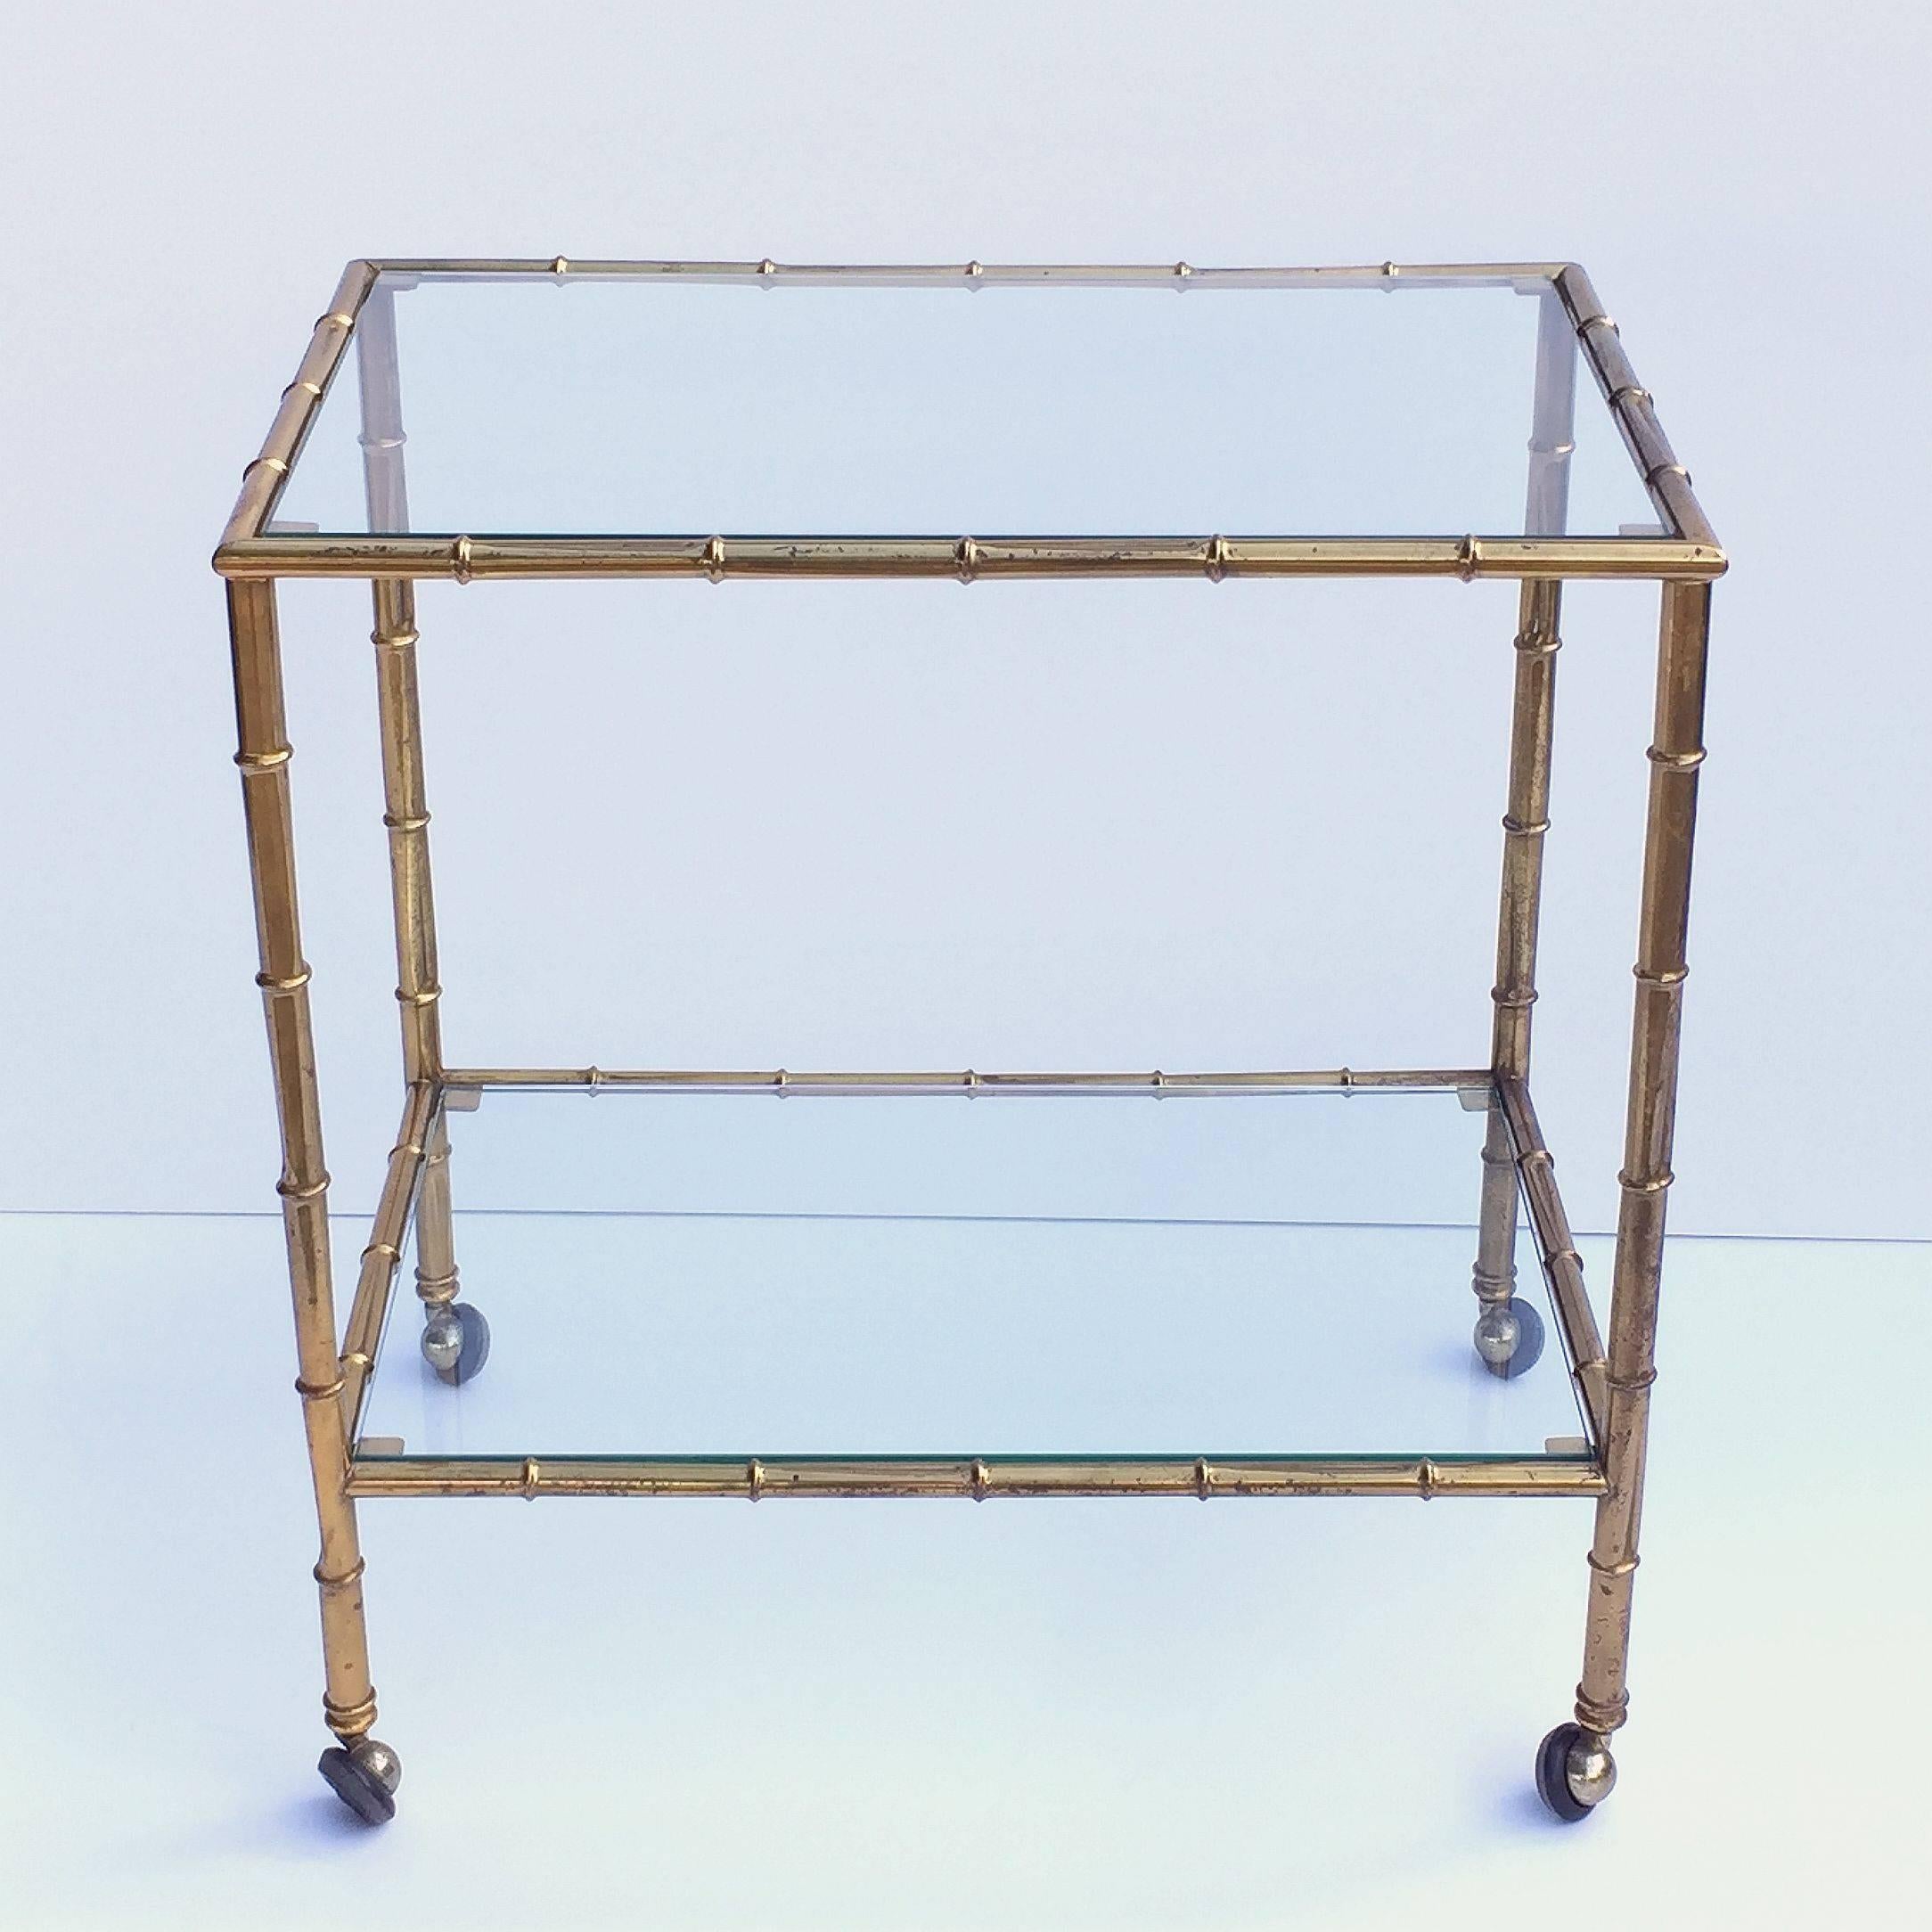 A handsome vintage French rectangular bar cart table or serving trolley in brass with a bamboo design, and featuring two glass tiers, on rolling caster wheels. 

Perfect for use as a side or end table.